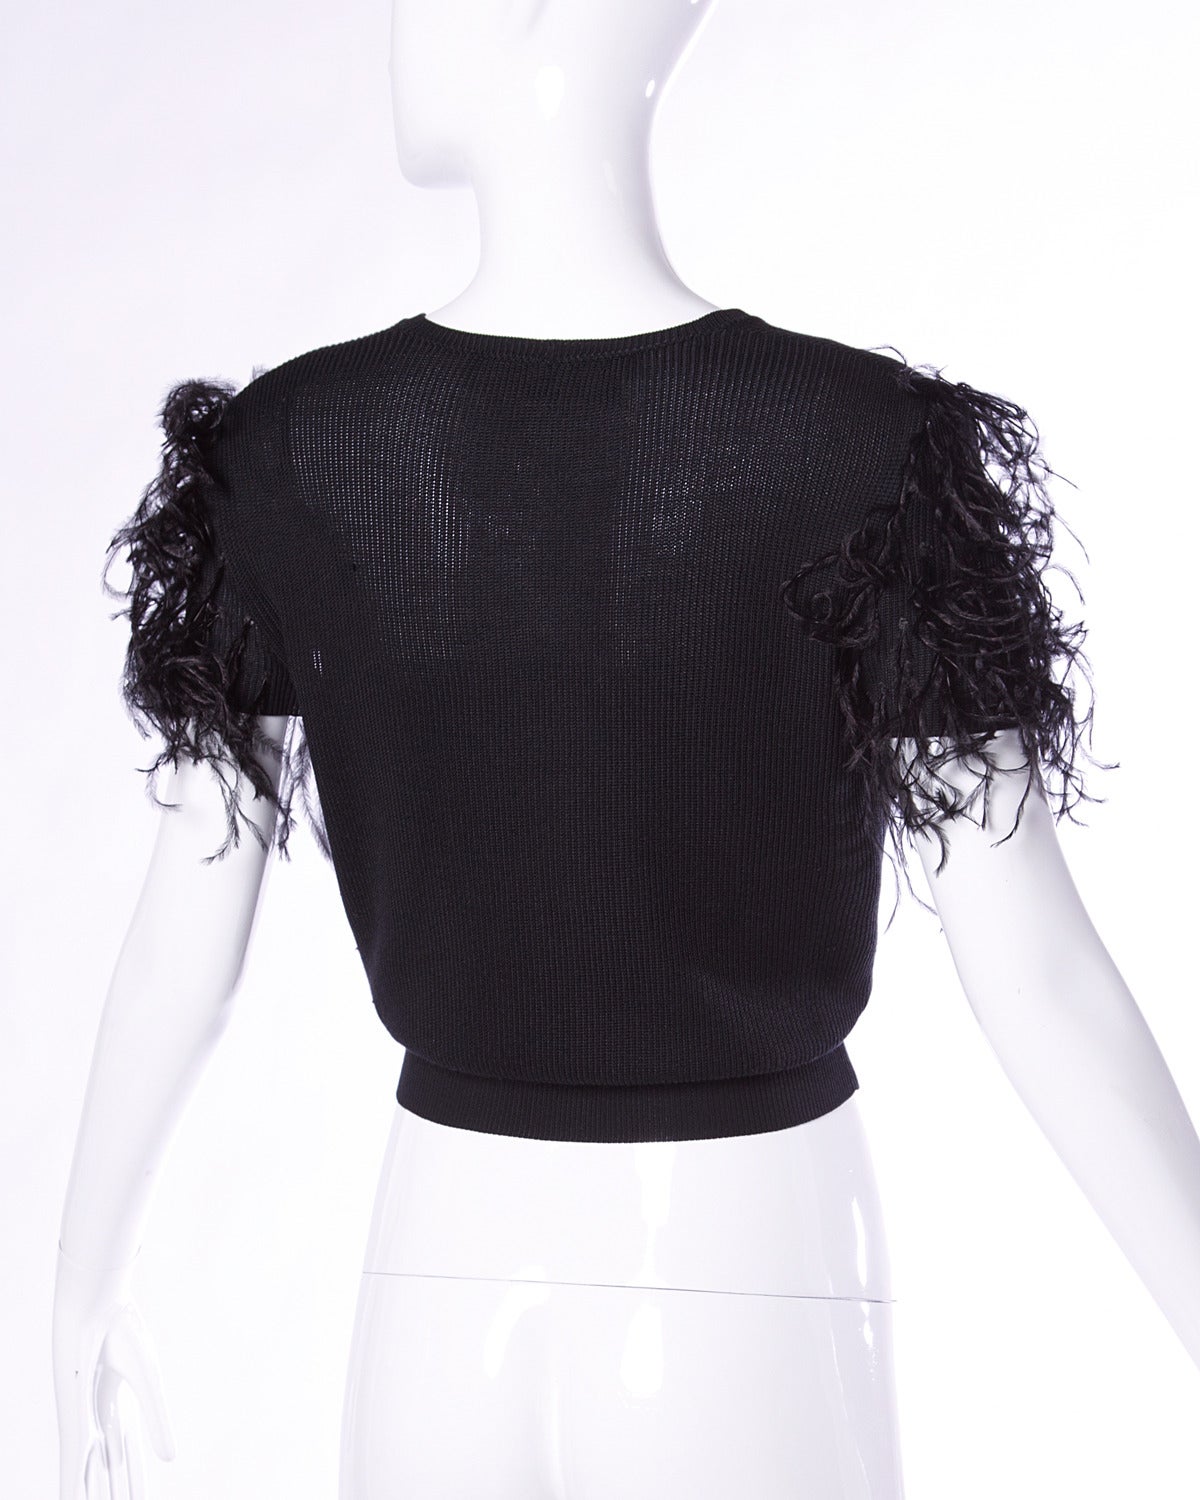 Vintage black silk knit top with a deep V neckline and feather sleeves by Valentino.

Details:

Unlined
No Closure/ Fabric Contains Stretch
Marked Size: Small
Color: Black
Fabric: Silk
Label: Valentino Boutique

Measurements:

Bust: Up